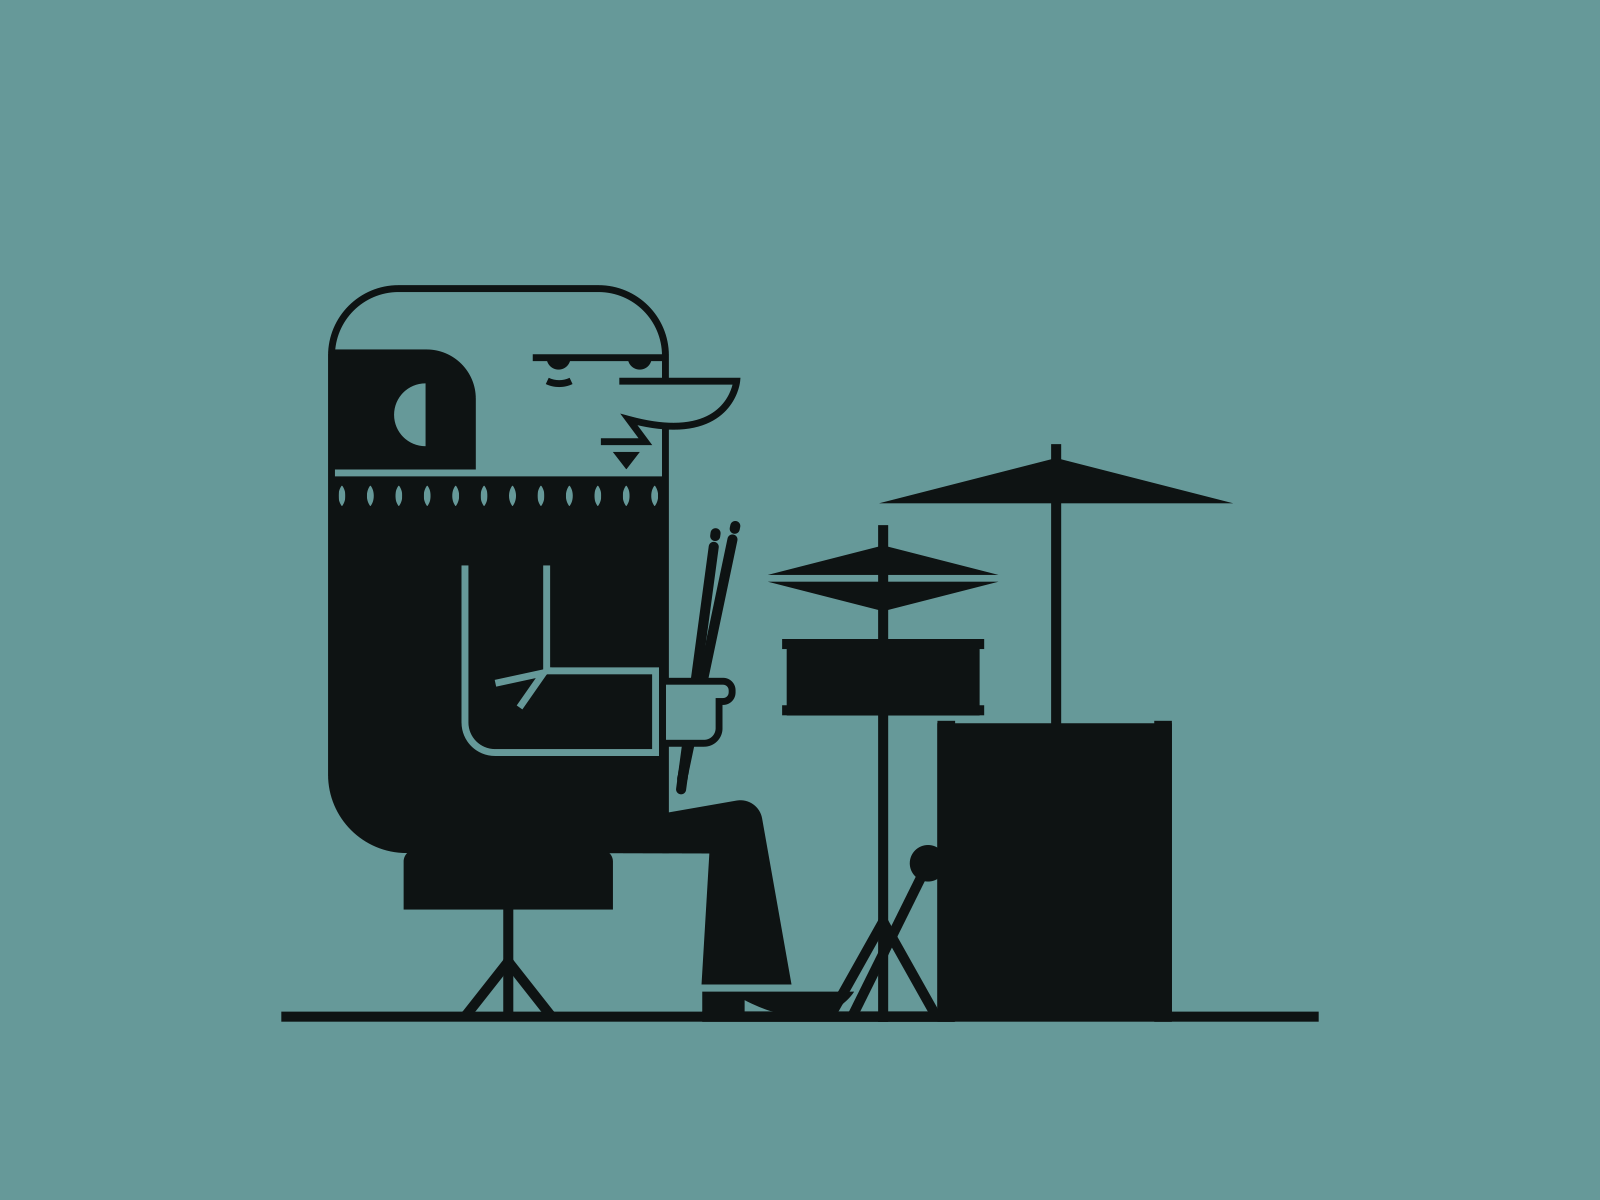 Drums by Rick Hines on Dribbble